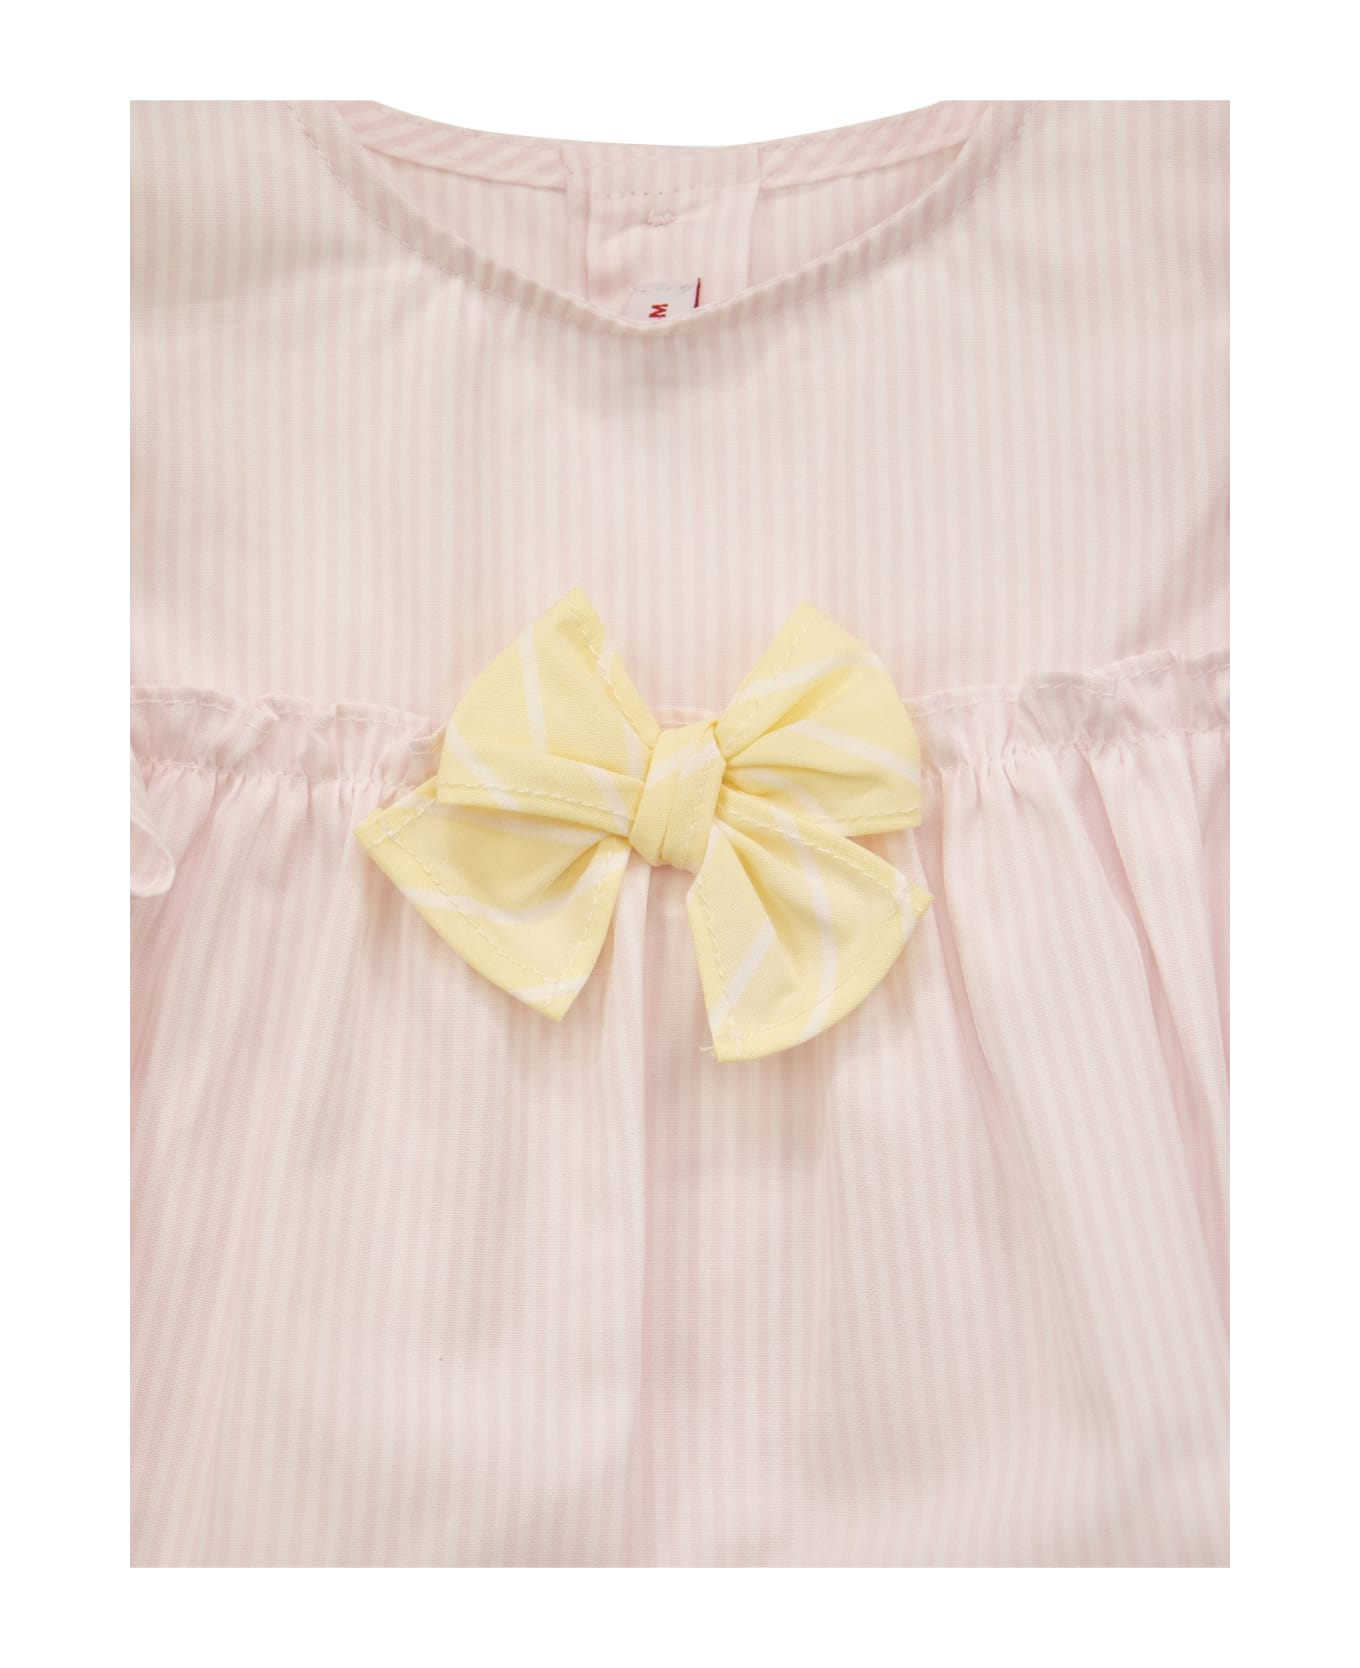 Il Gufo Striped Cotton Suit - Pink/yellow ボディスーツ＆セットアップ